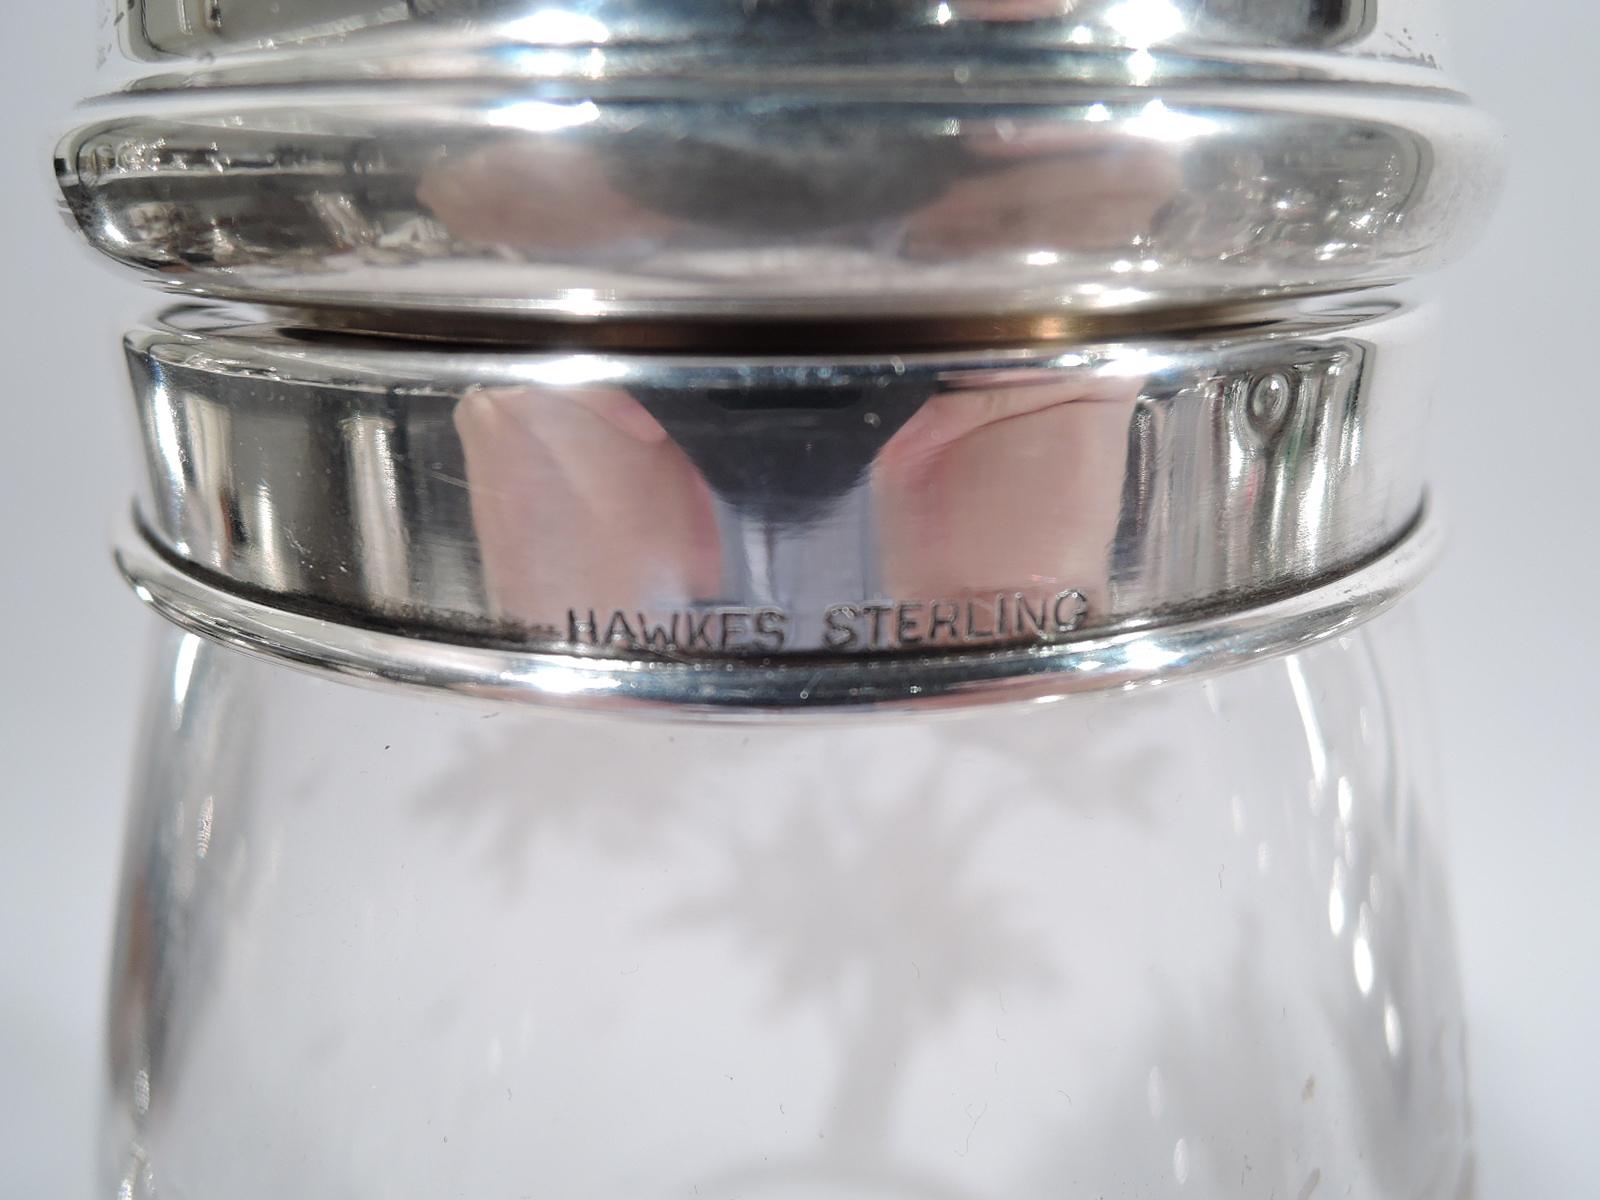 Antique Hawkes Glass and Sterling Silver Fox Hunt Cocktail Shaker 1